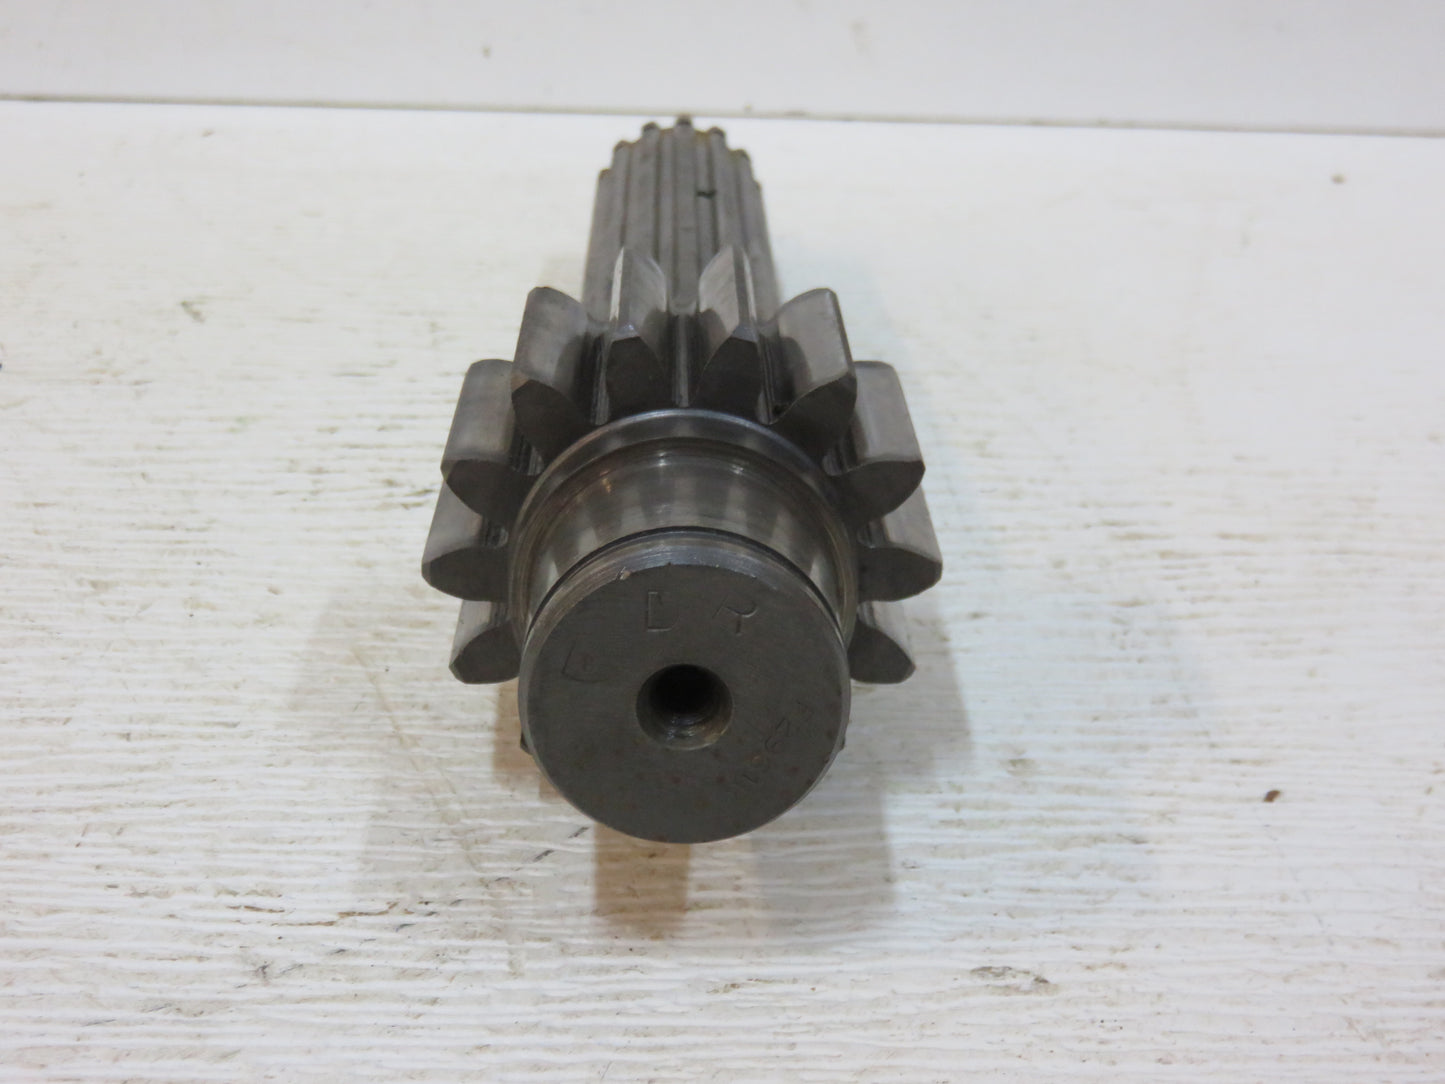 F2961R John Deere PTO Clutch Shaft And Gear For 720